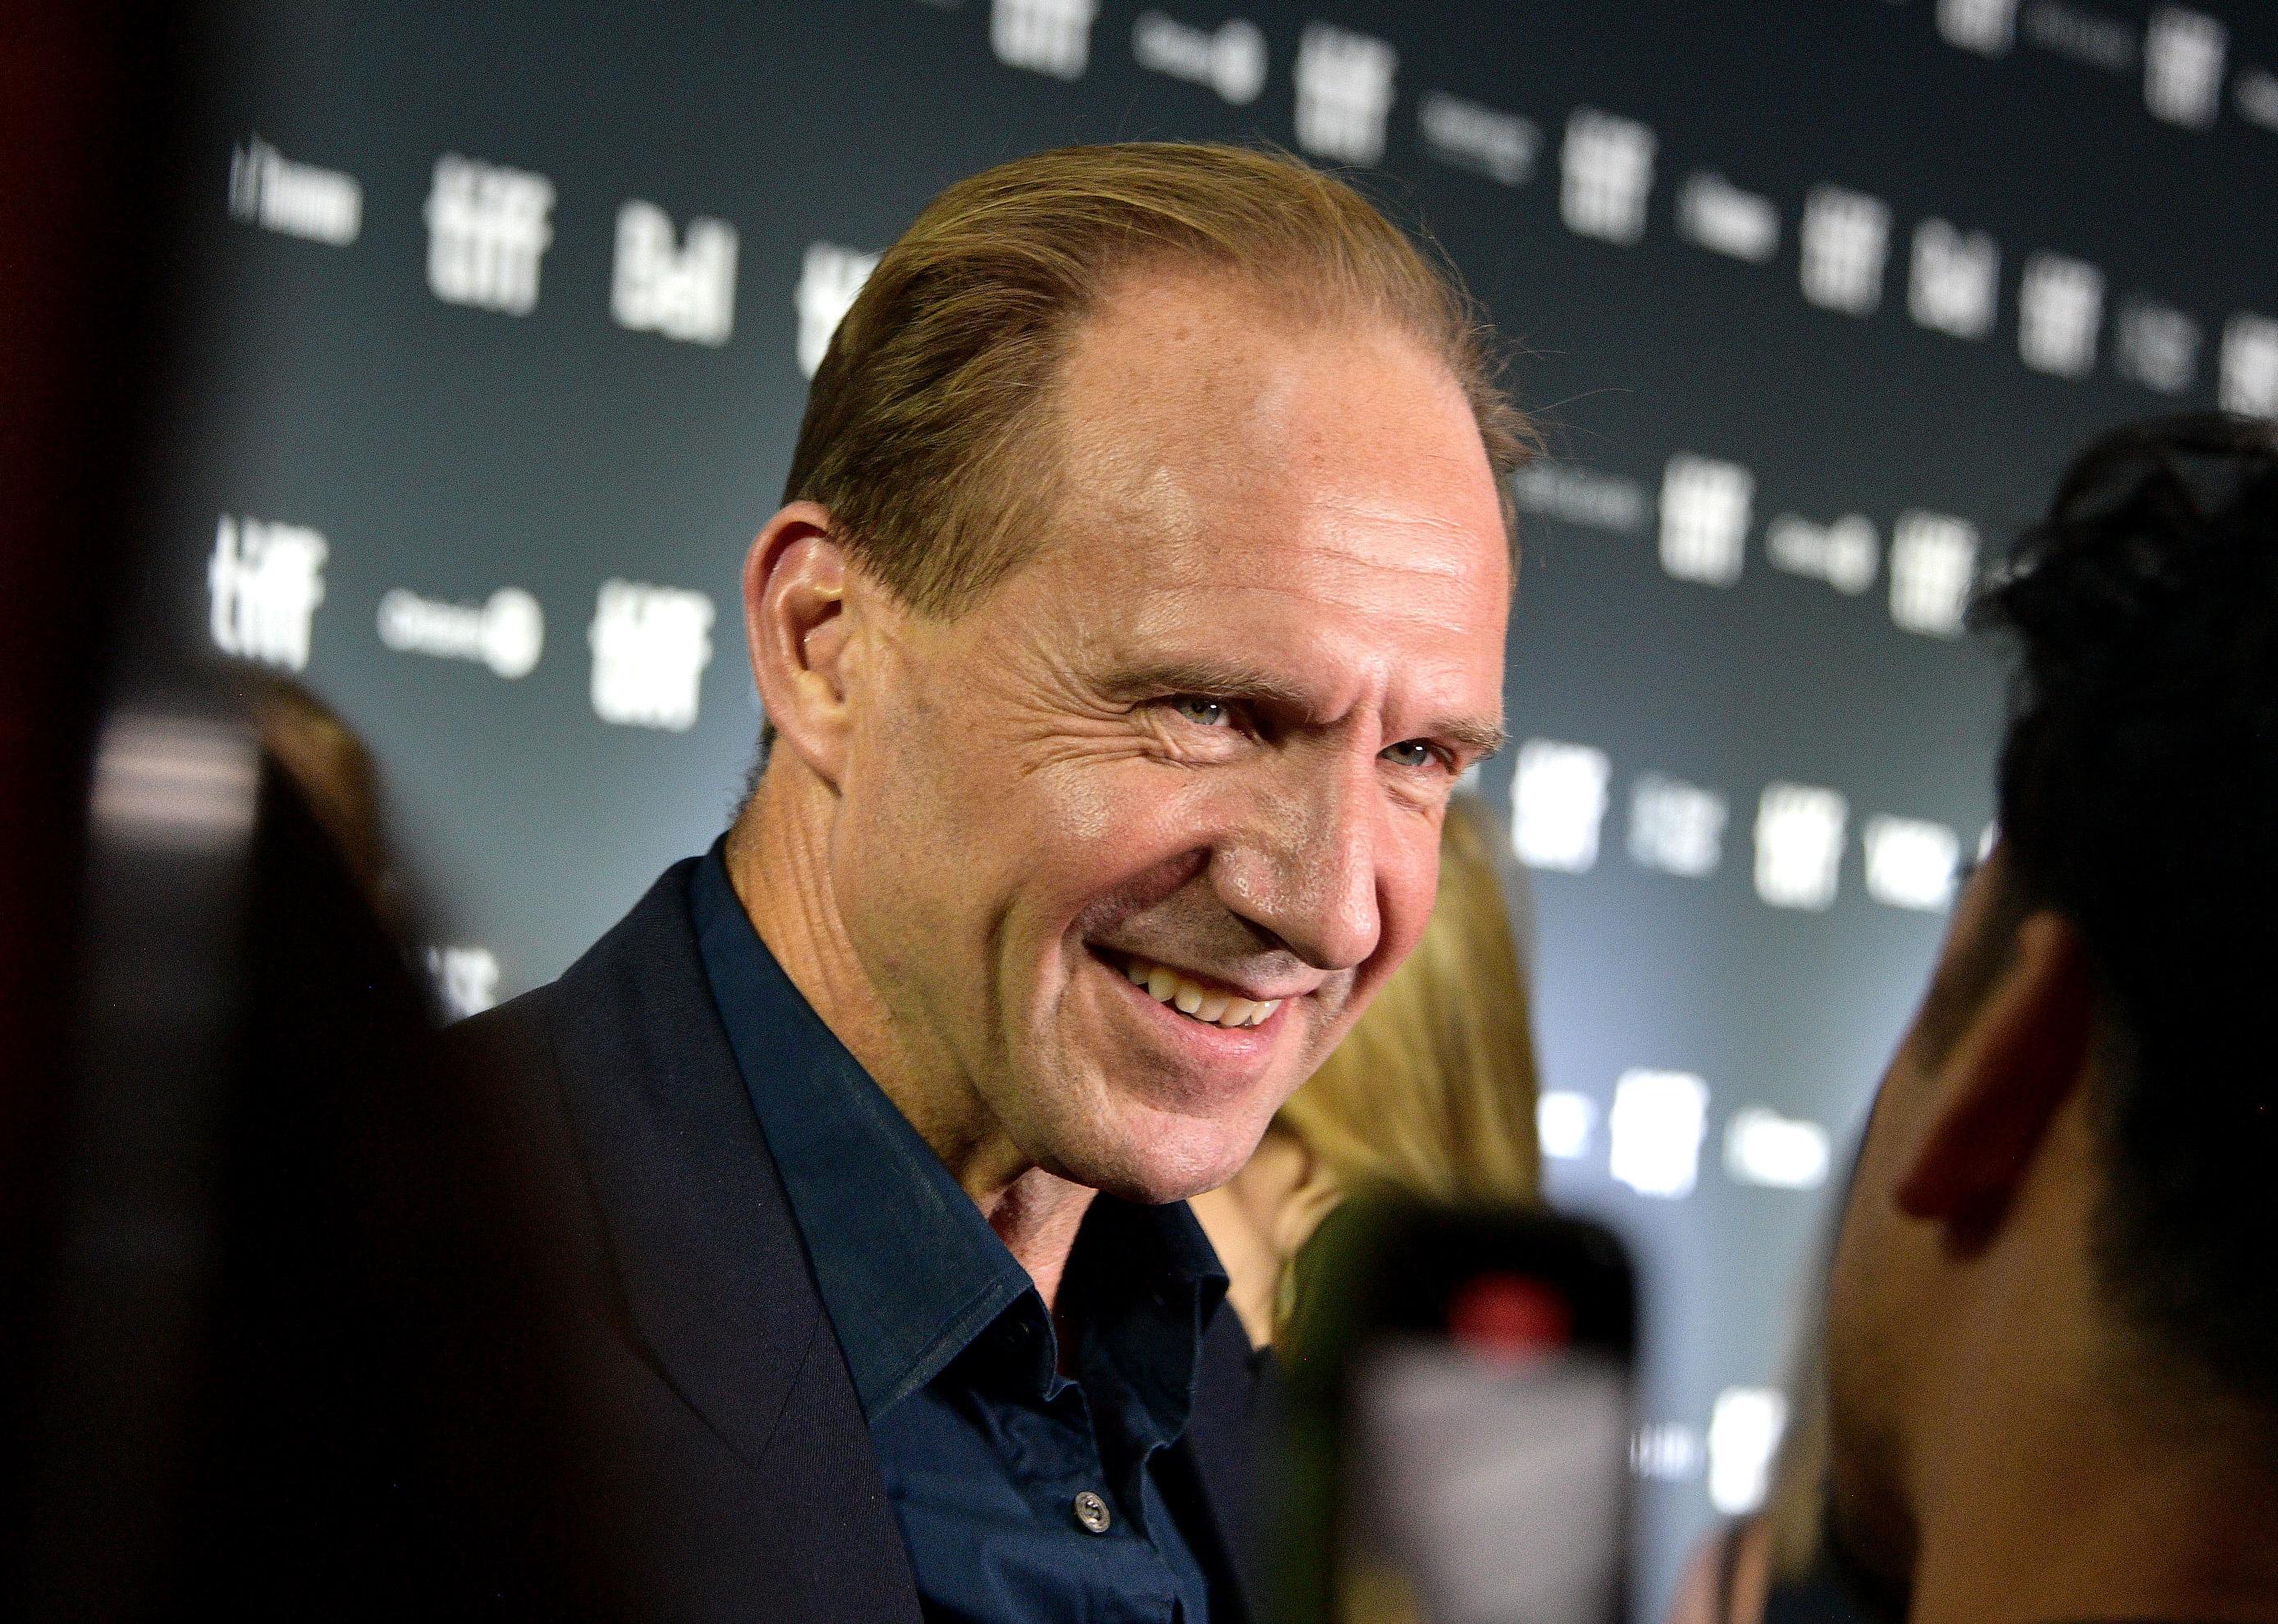 Ralph Fiennes in a blue shirt and black jacket.